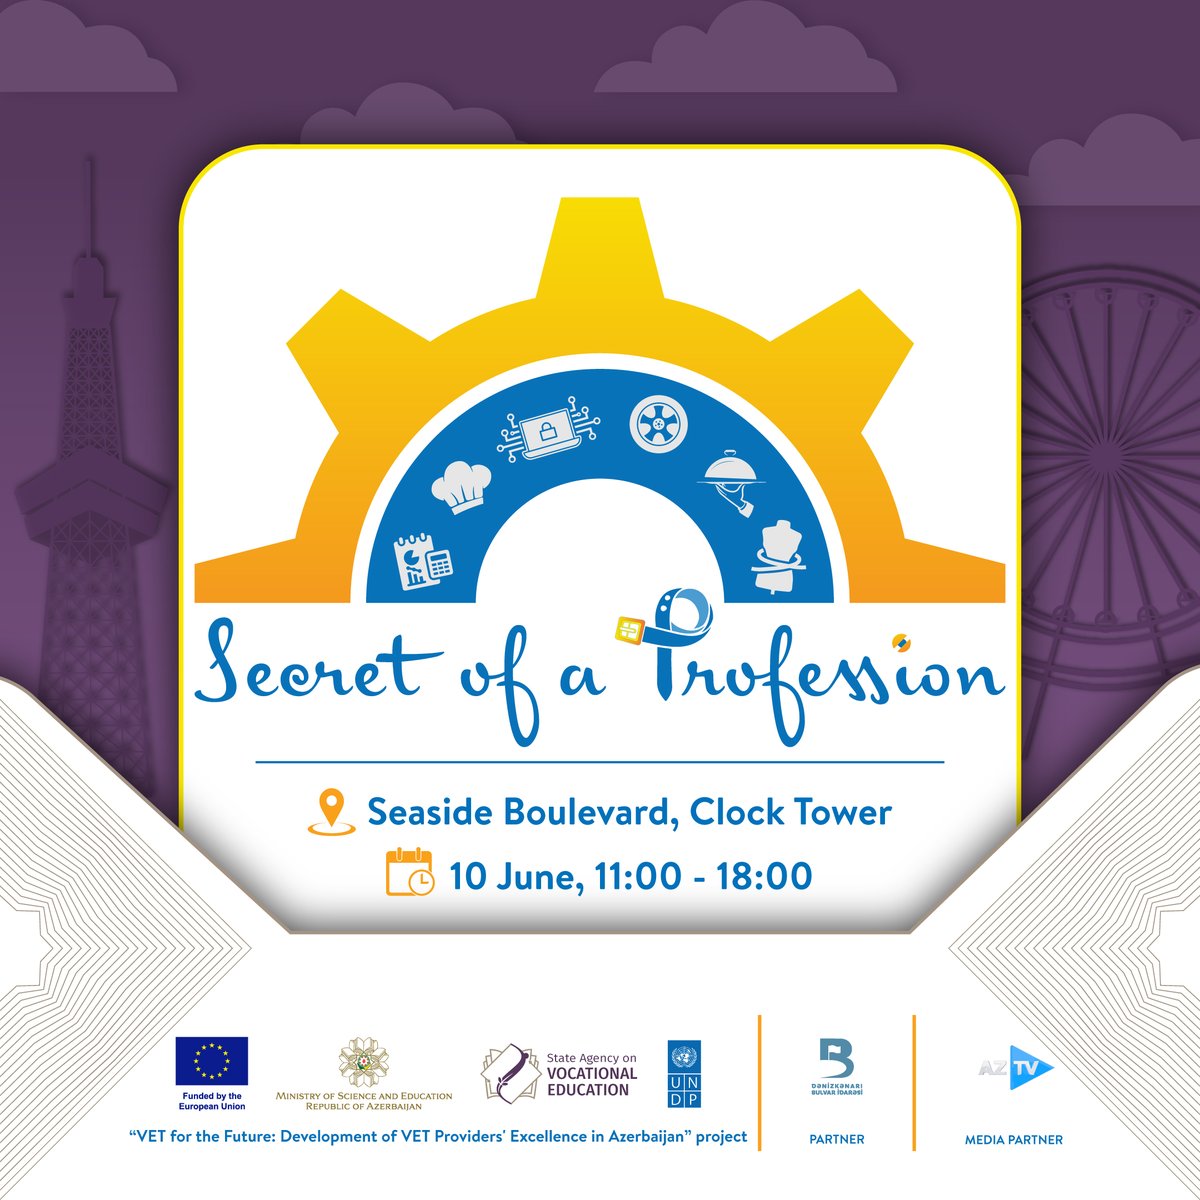 'Secret of a Profession' Festival is coming soon!

W/ our partners, #EU & @vetedugovaz, we help organise the 2nd Vocational #Education Festival in Baku offering:

🔸exhibitions & master classes
🔹fun games
🔸to network w/ professionals
🔹to try new skills. 

#undpeupartnership